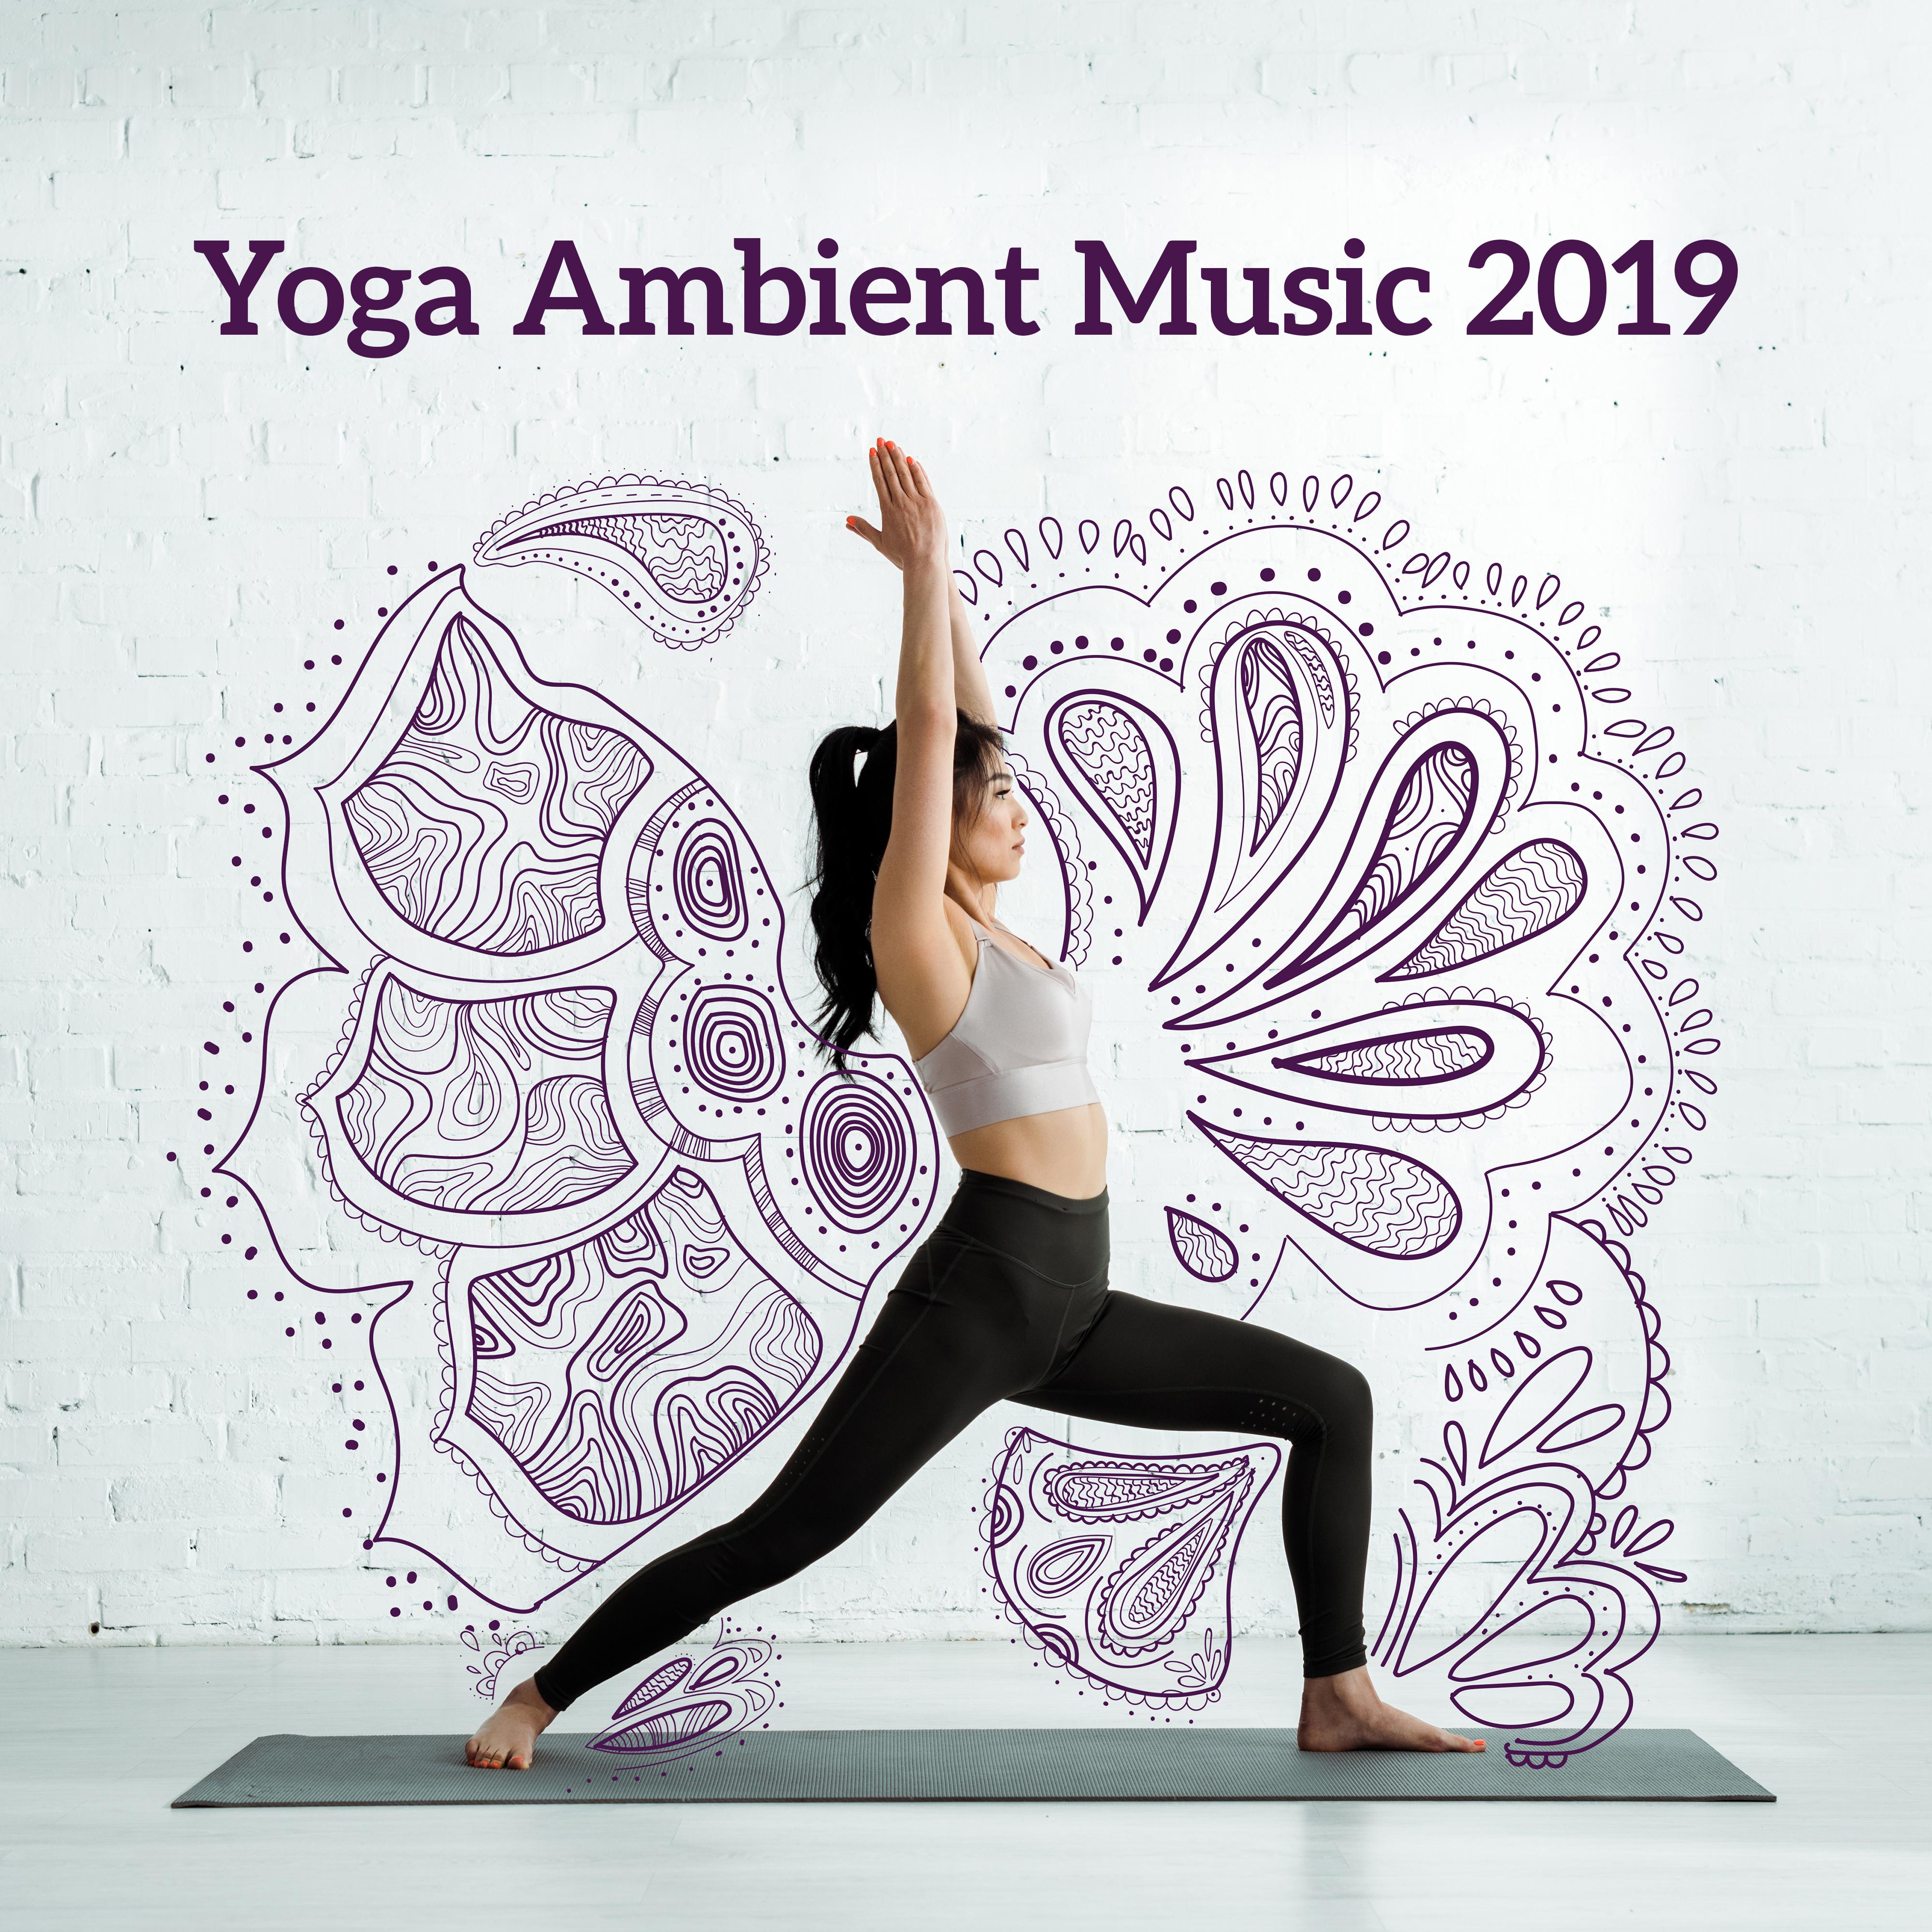 Yoga Ambient Music 2019: Meditation Therapy, Ambient Chill, Inner Balance, Kundalini Awakening, Stress Relief, Chillout Zone, Meditation Awareness